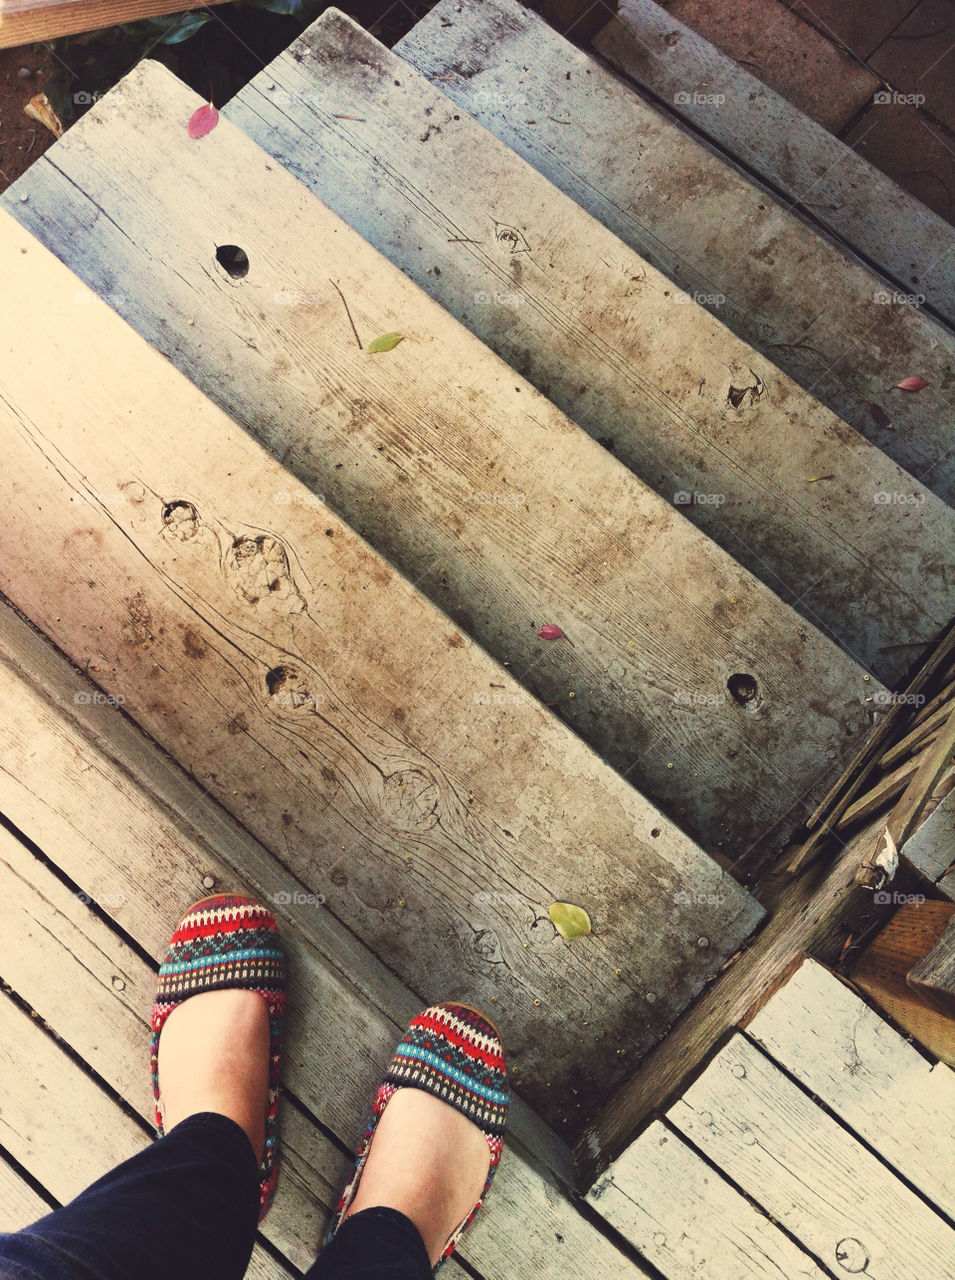 Feet on dirty stairs.